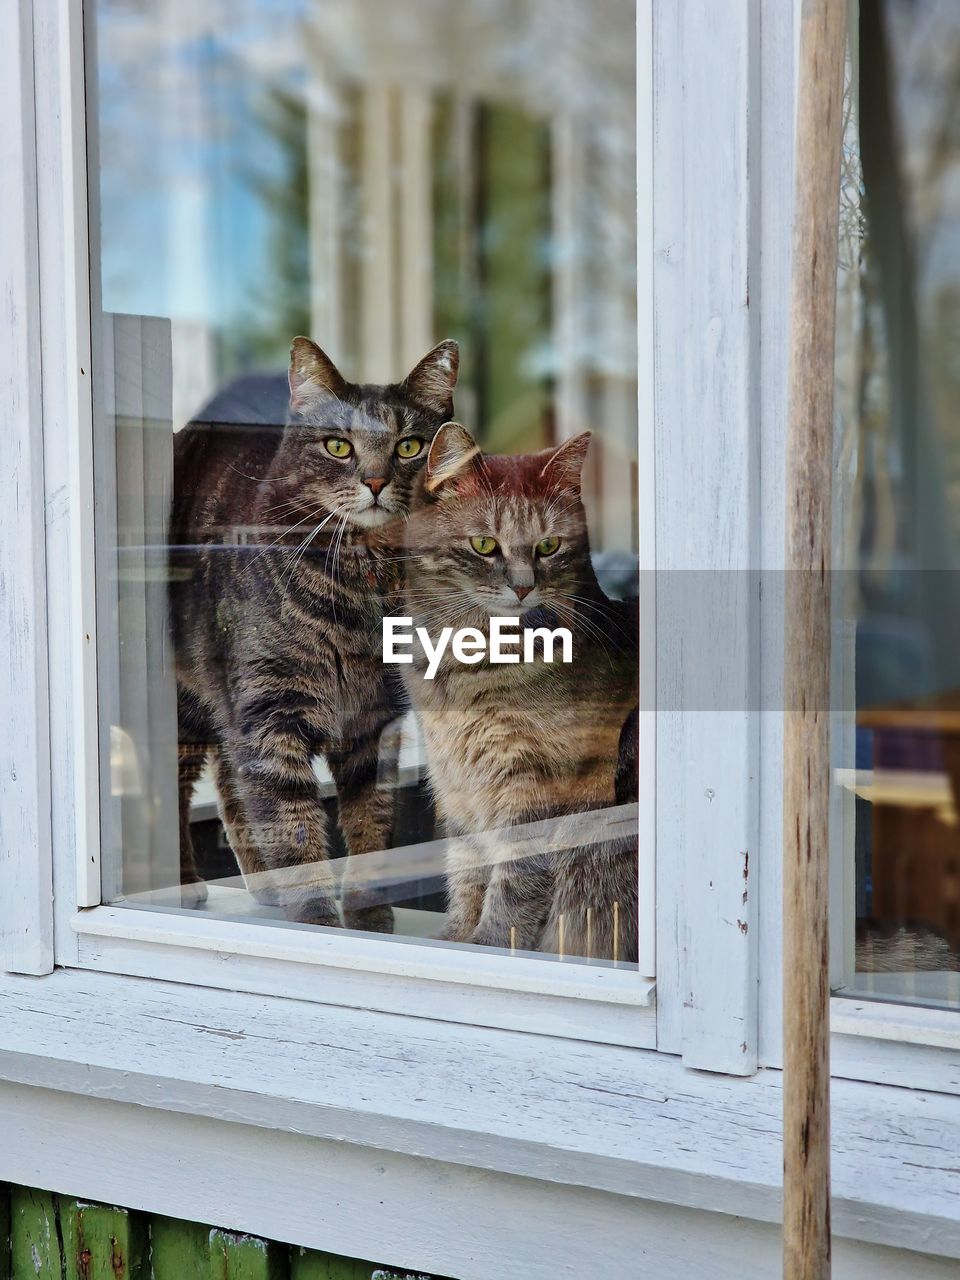 Cats behind the window